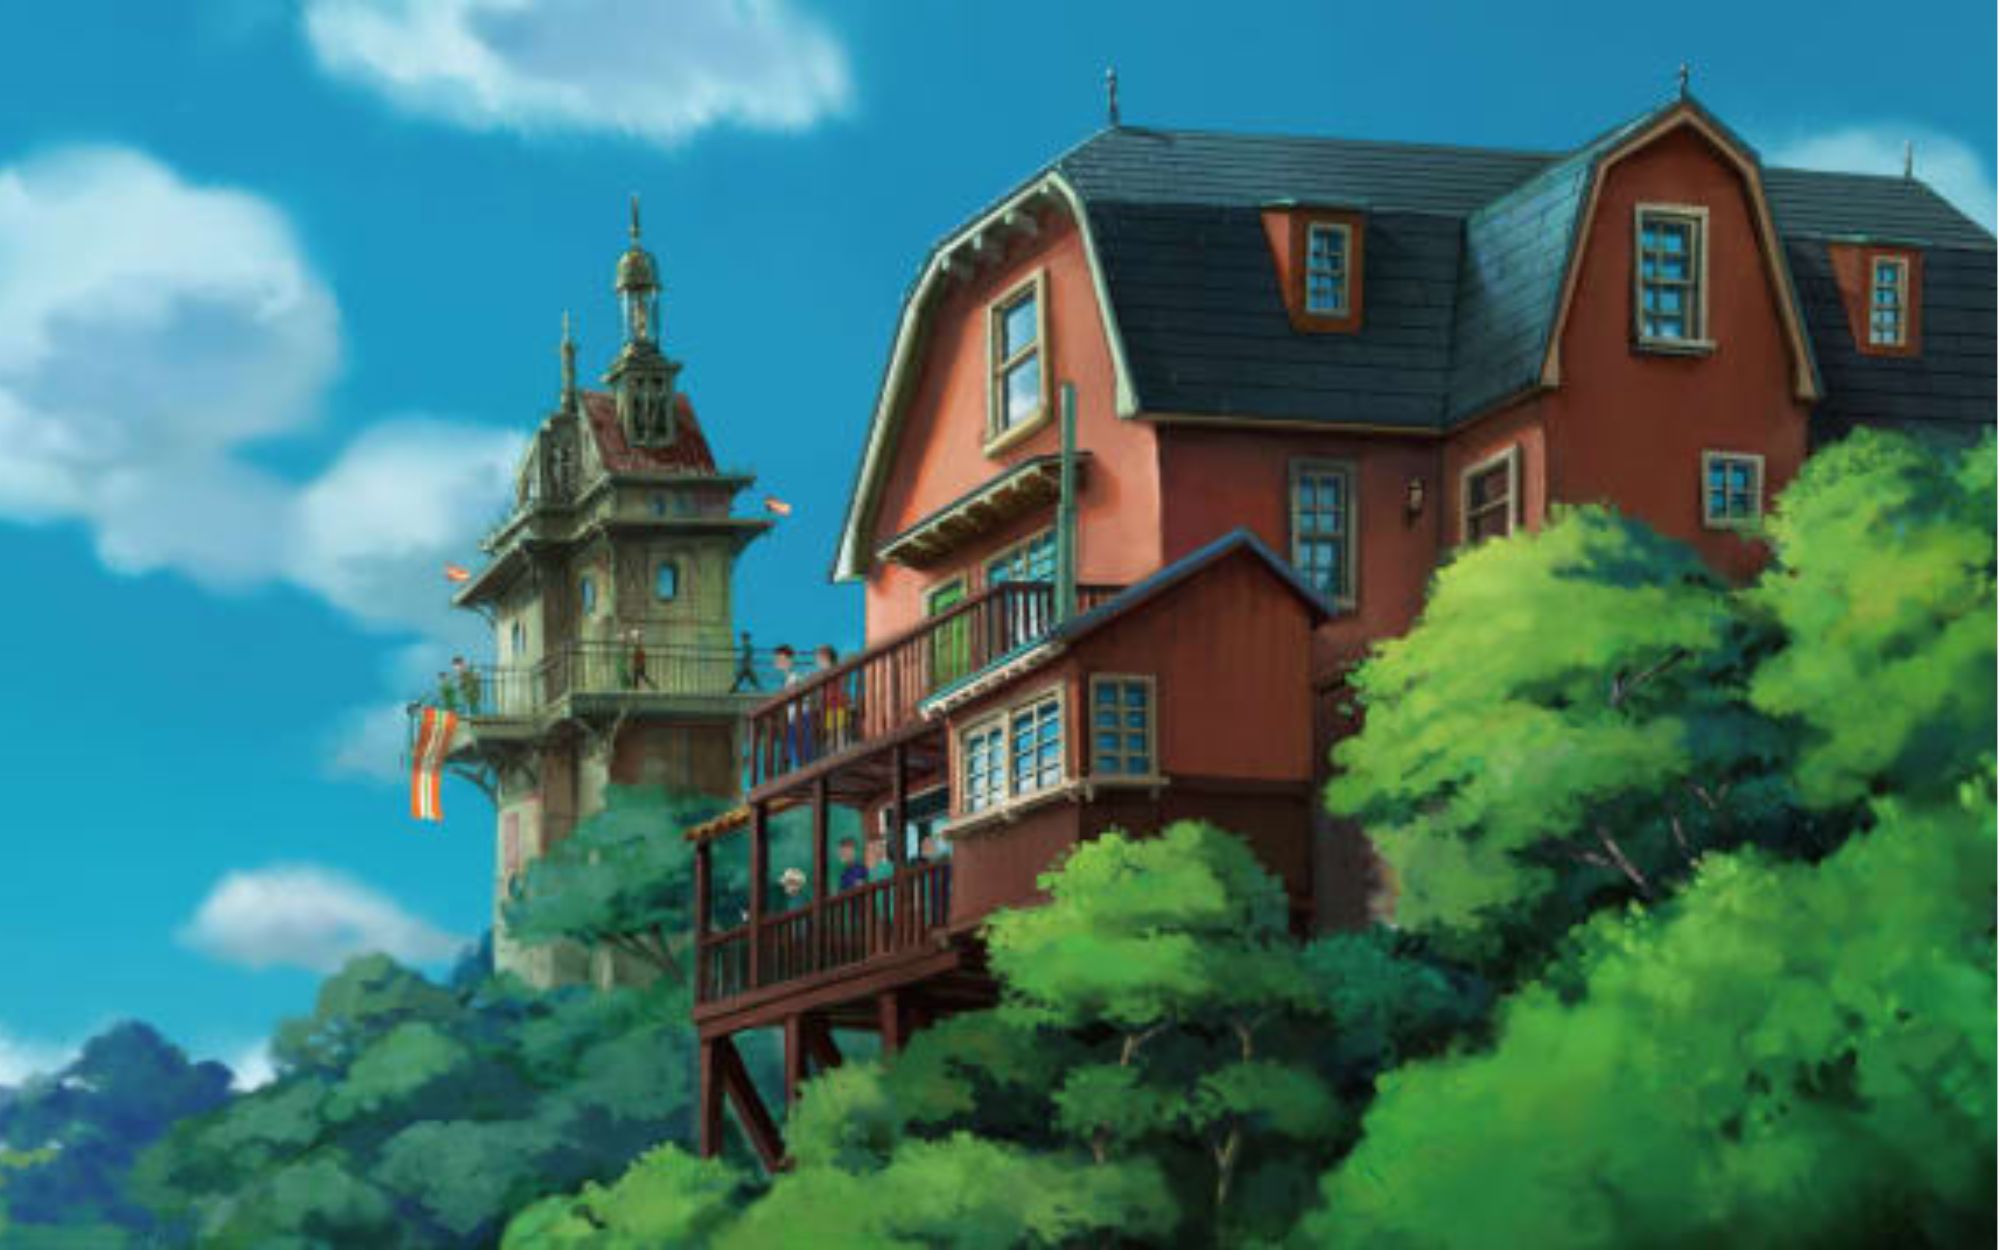 A representation of the Park's attempt to recreate the antique shop seen in "Whisper of the Heart."